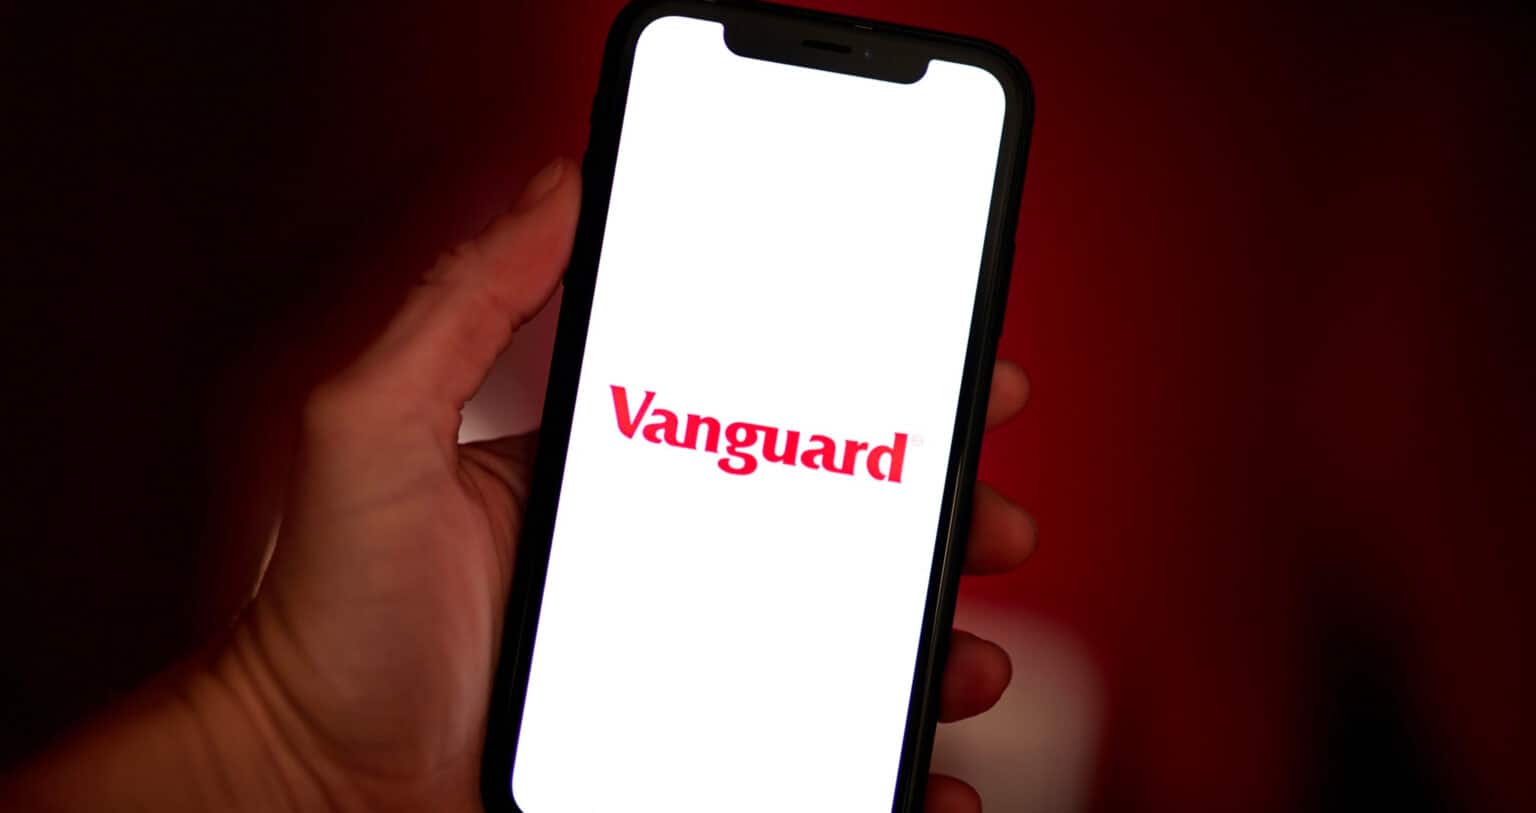 A hand holds a smartphone with a bright white screen with the red Vanguard logo in the middle